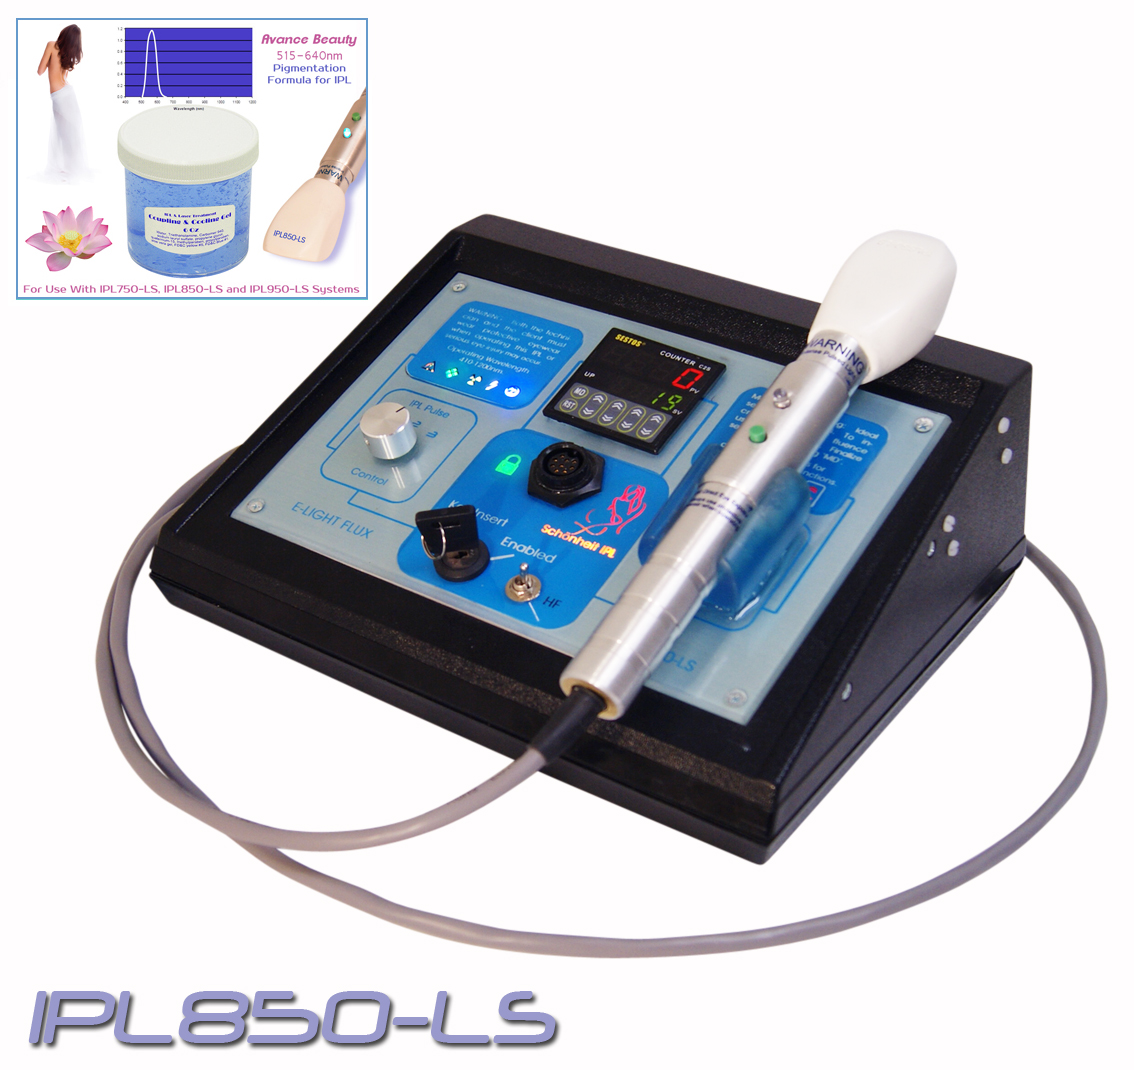 IPL850-LS Pigmentation Therapy Gel Kit 515-640nm with Beauty Treatment Machine, System, Device.  642057128605